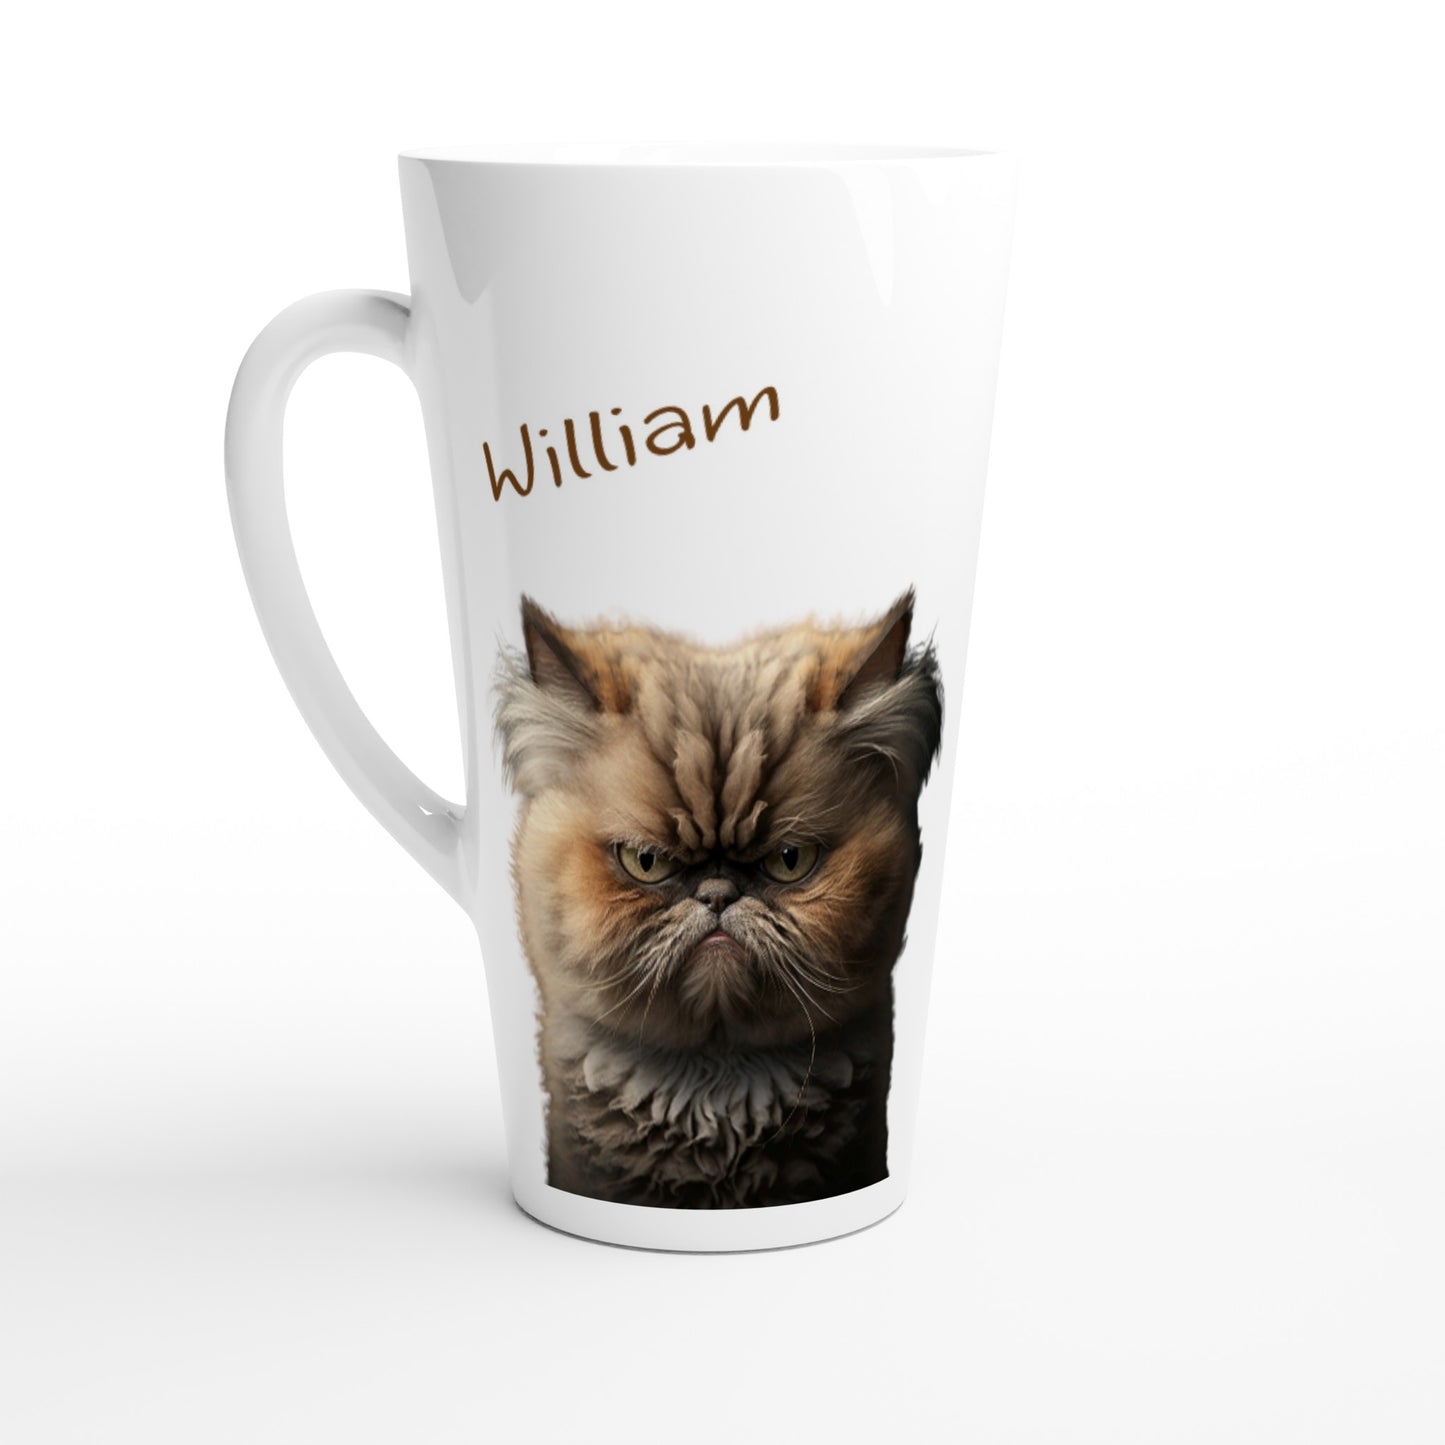 Fat cat latte mug with name on it